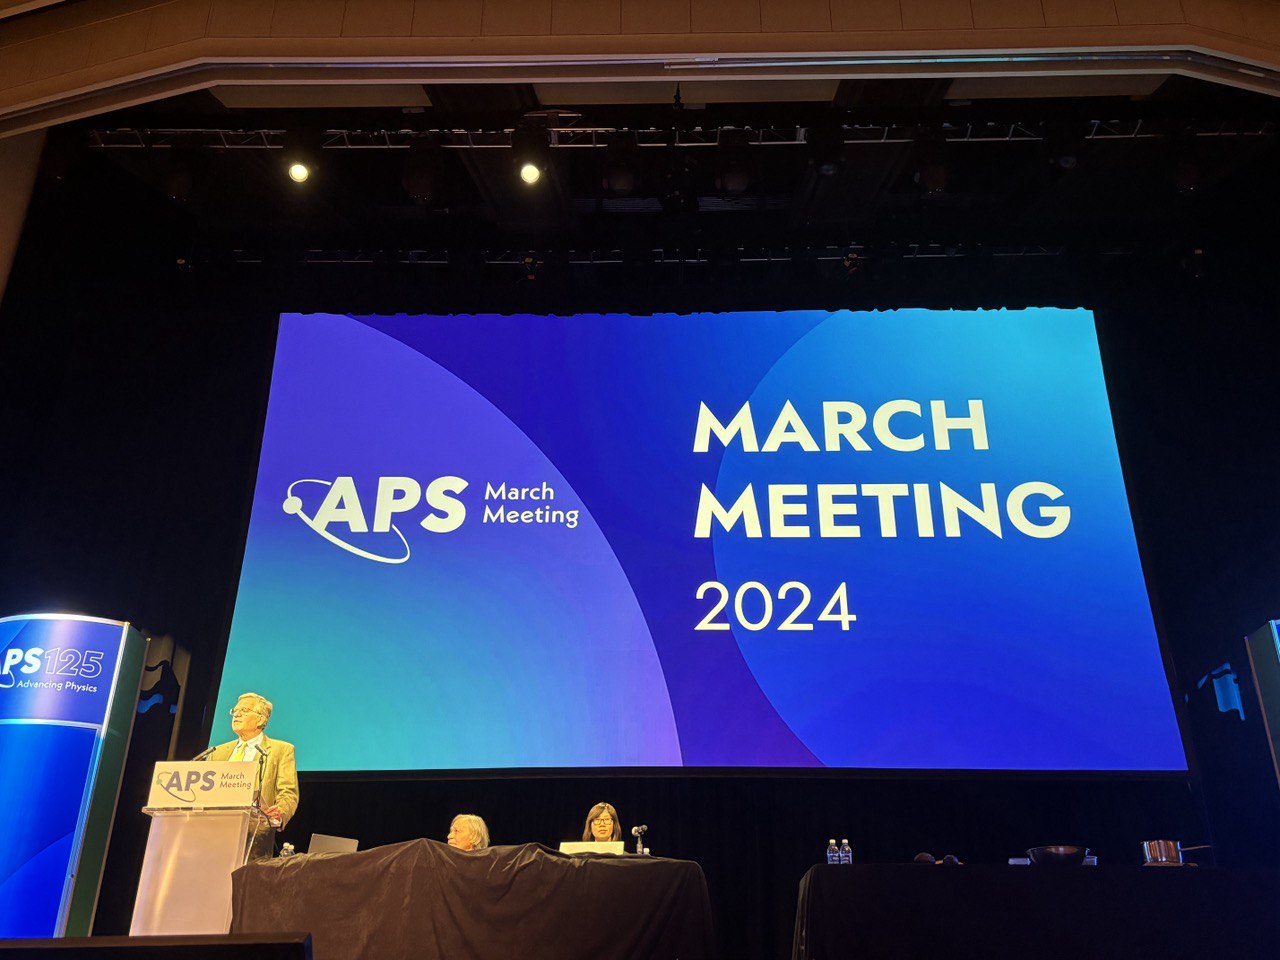 Alice and Daniel attended the American Physical Society’s March Meeting 2024